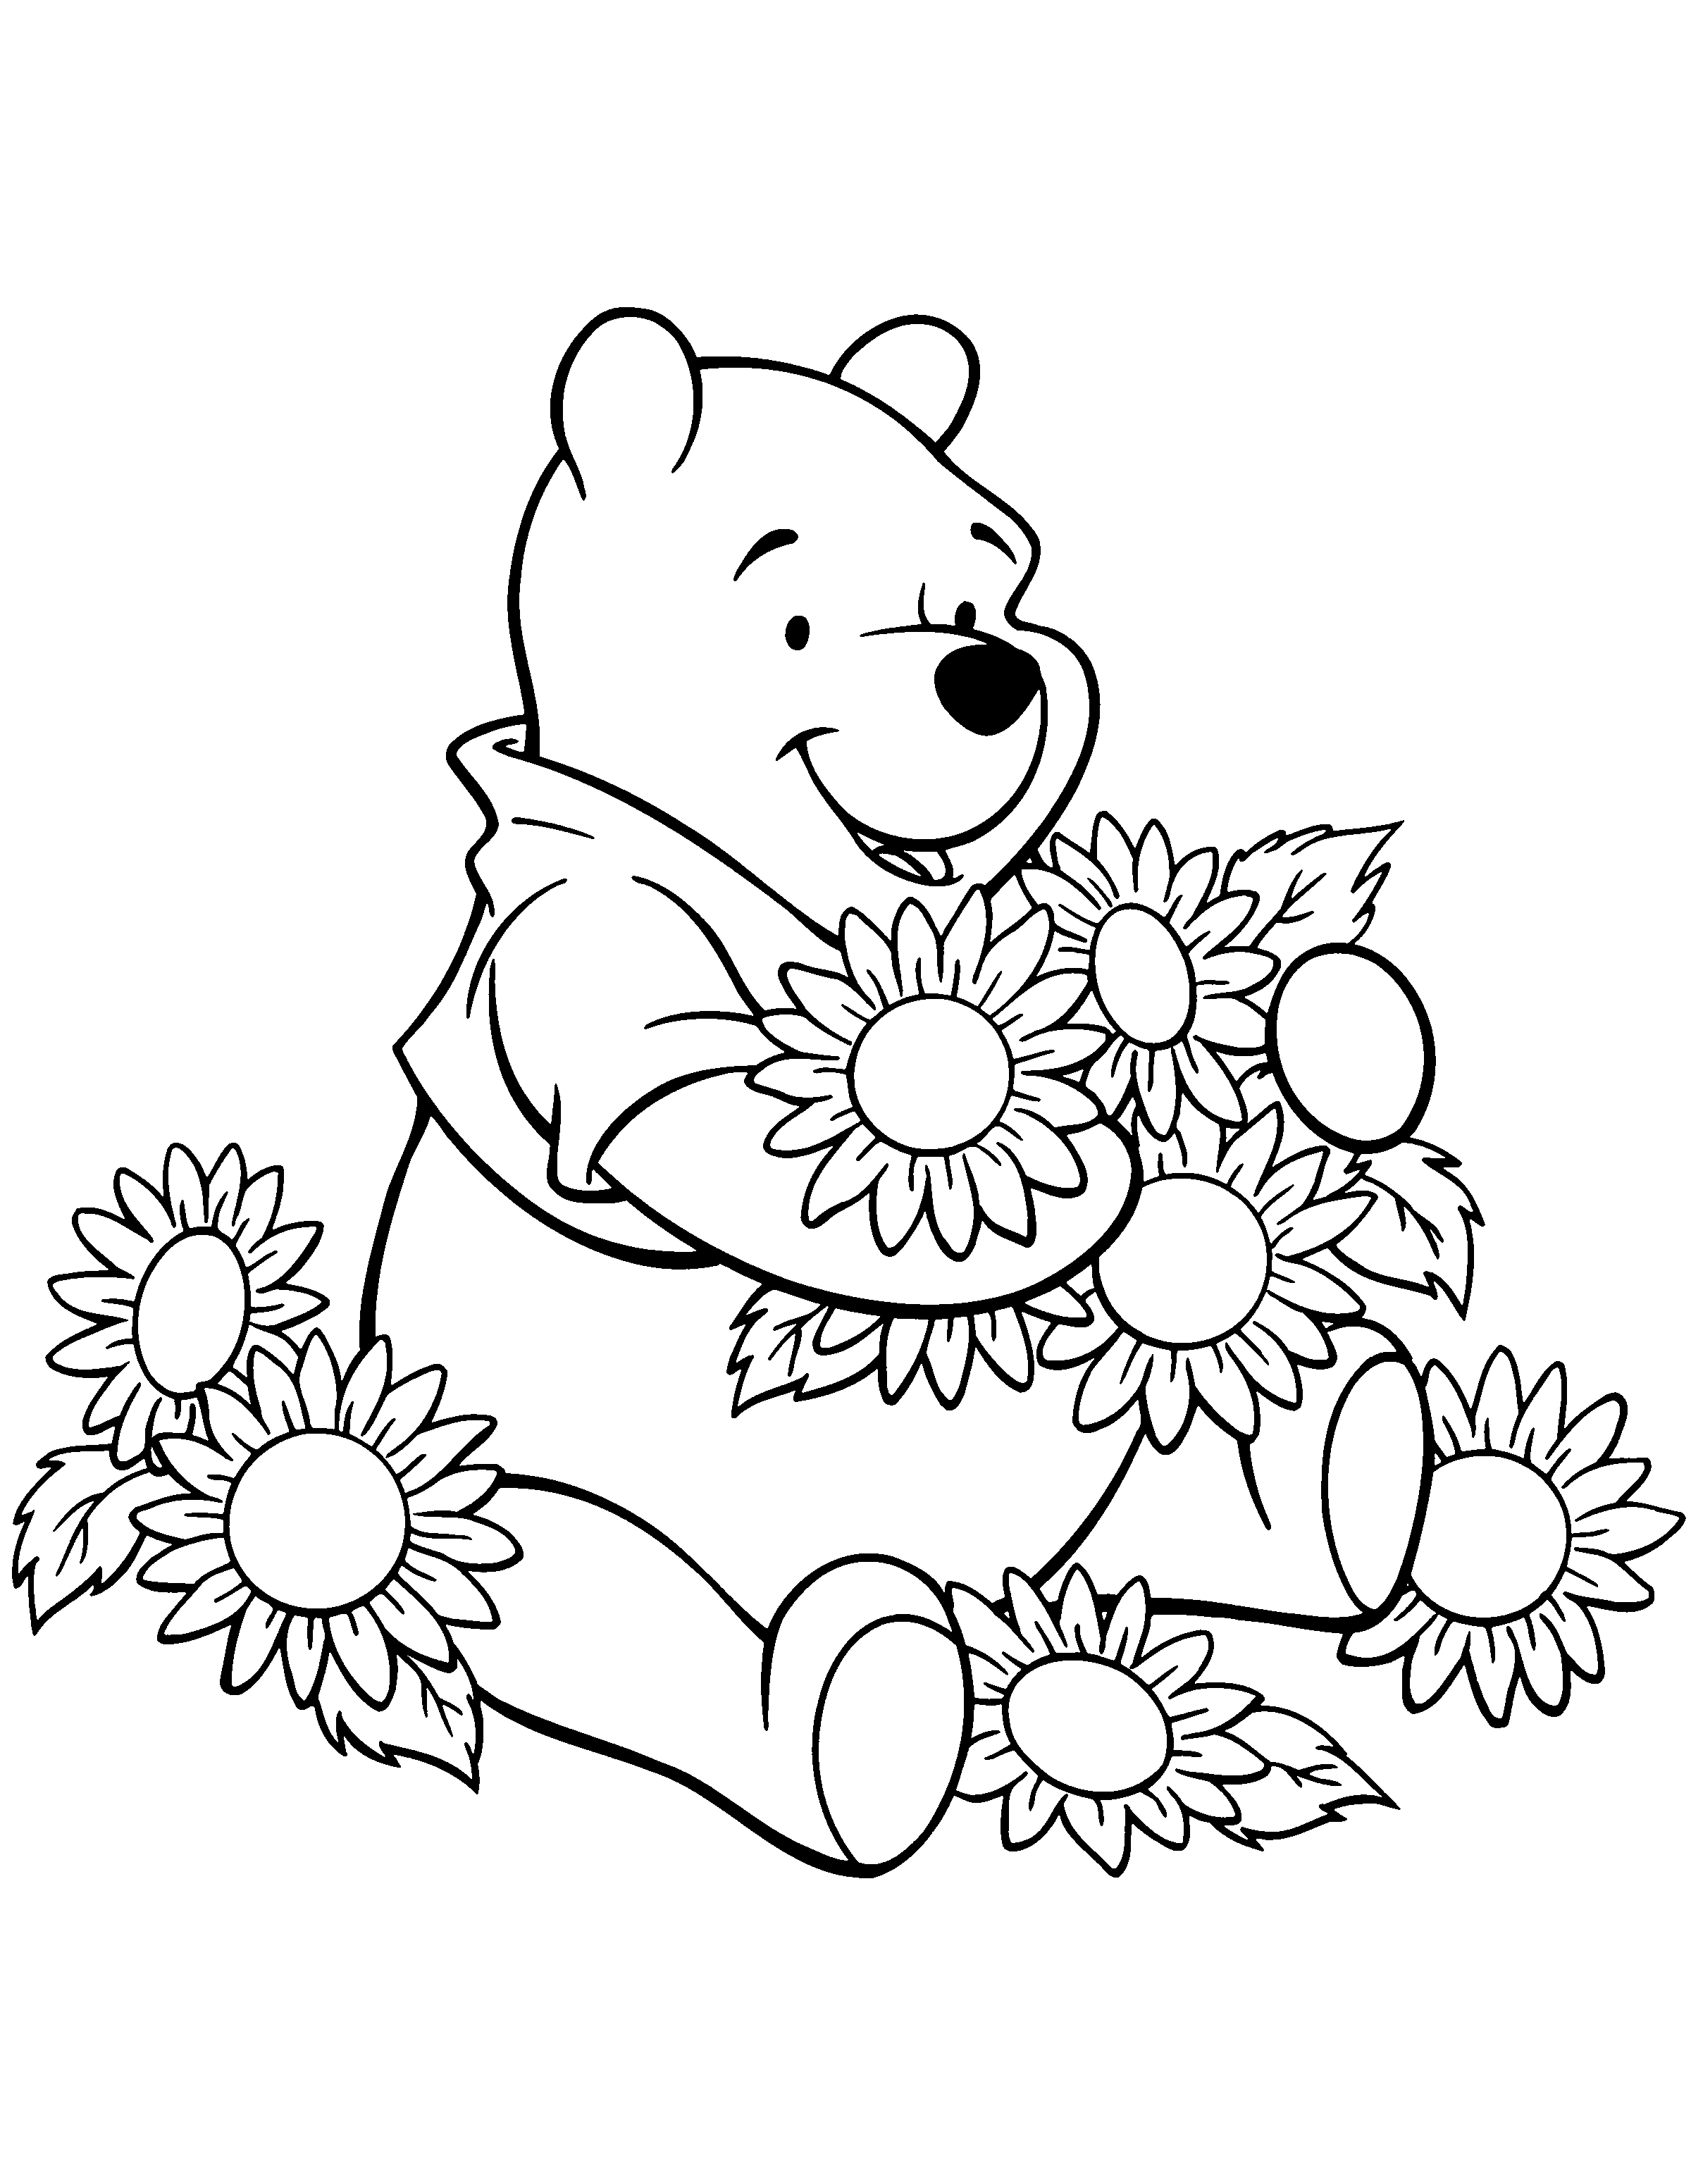 Coloring Pages Winnie The Pooh Classic - Coloring Home